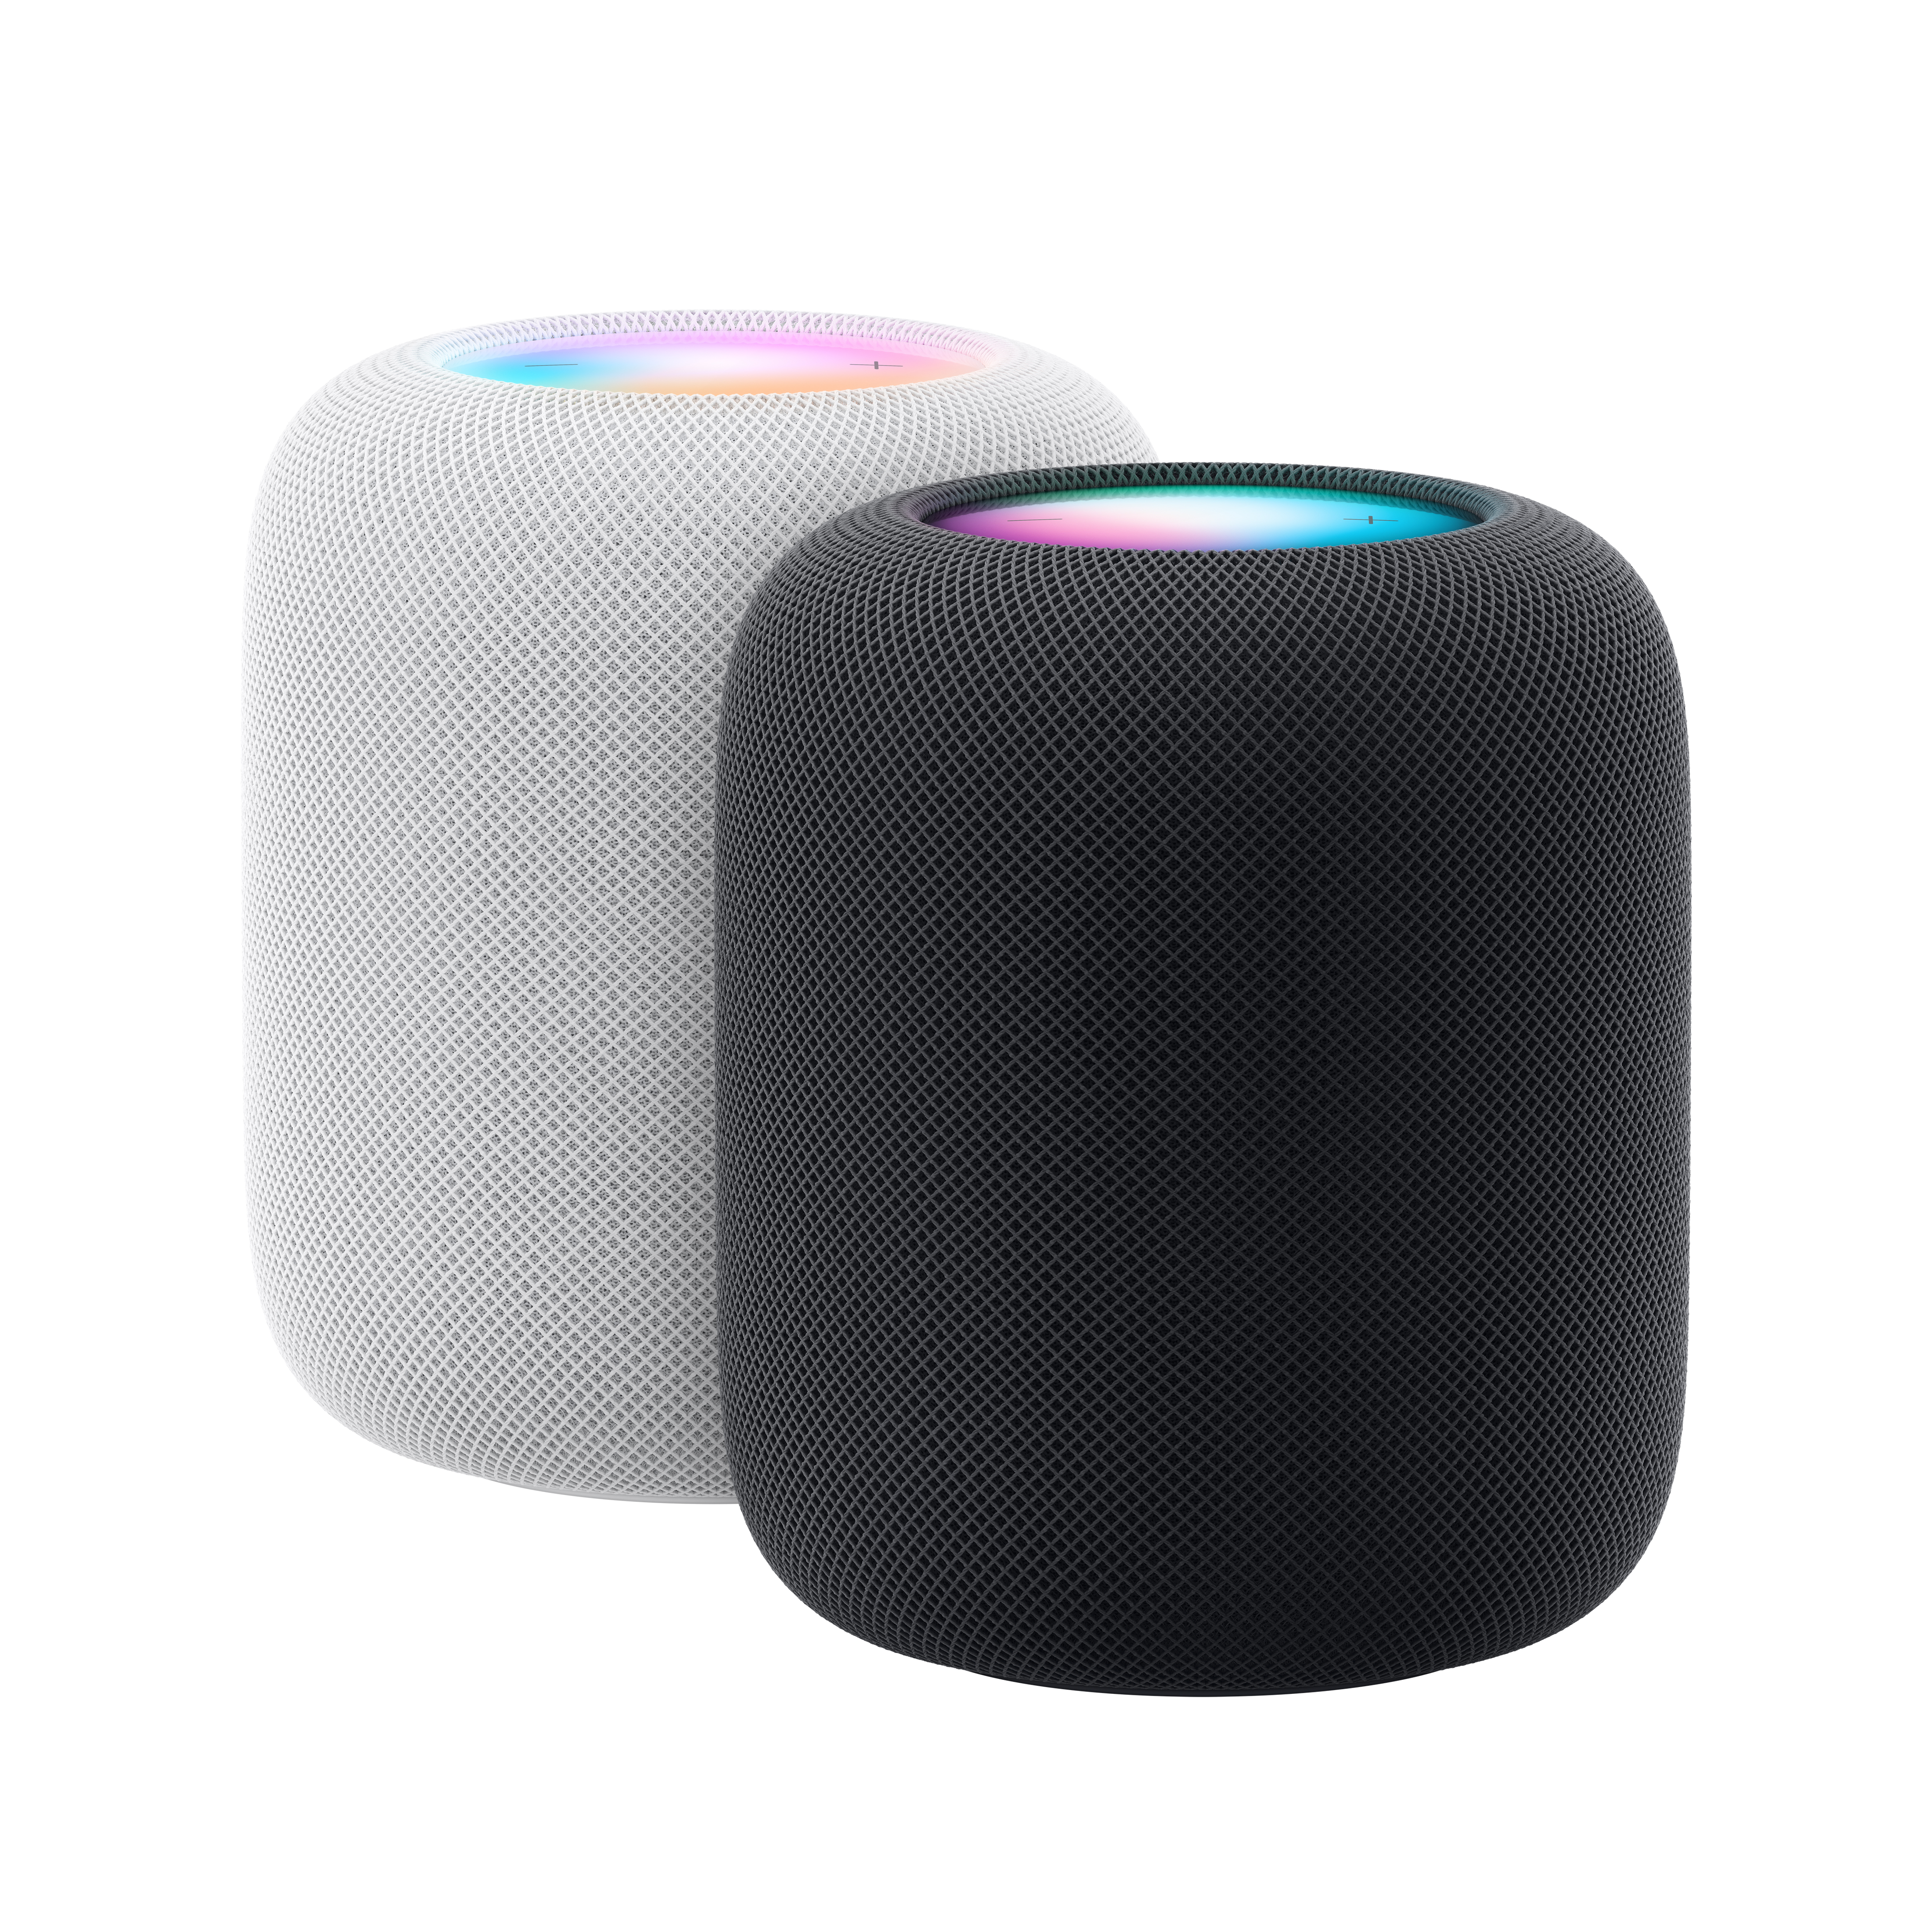 Apple HomePod (第2代), , large image number 0